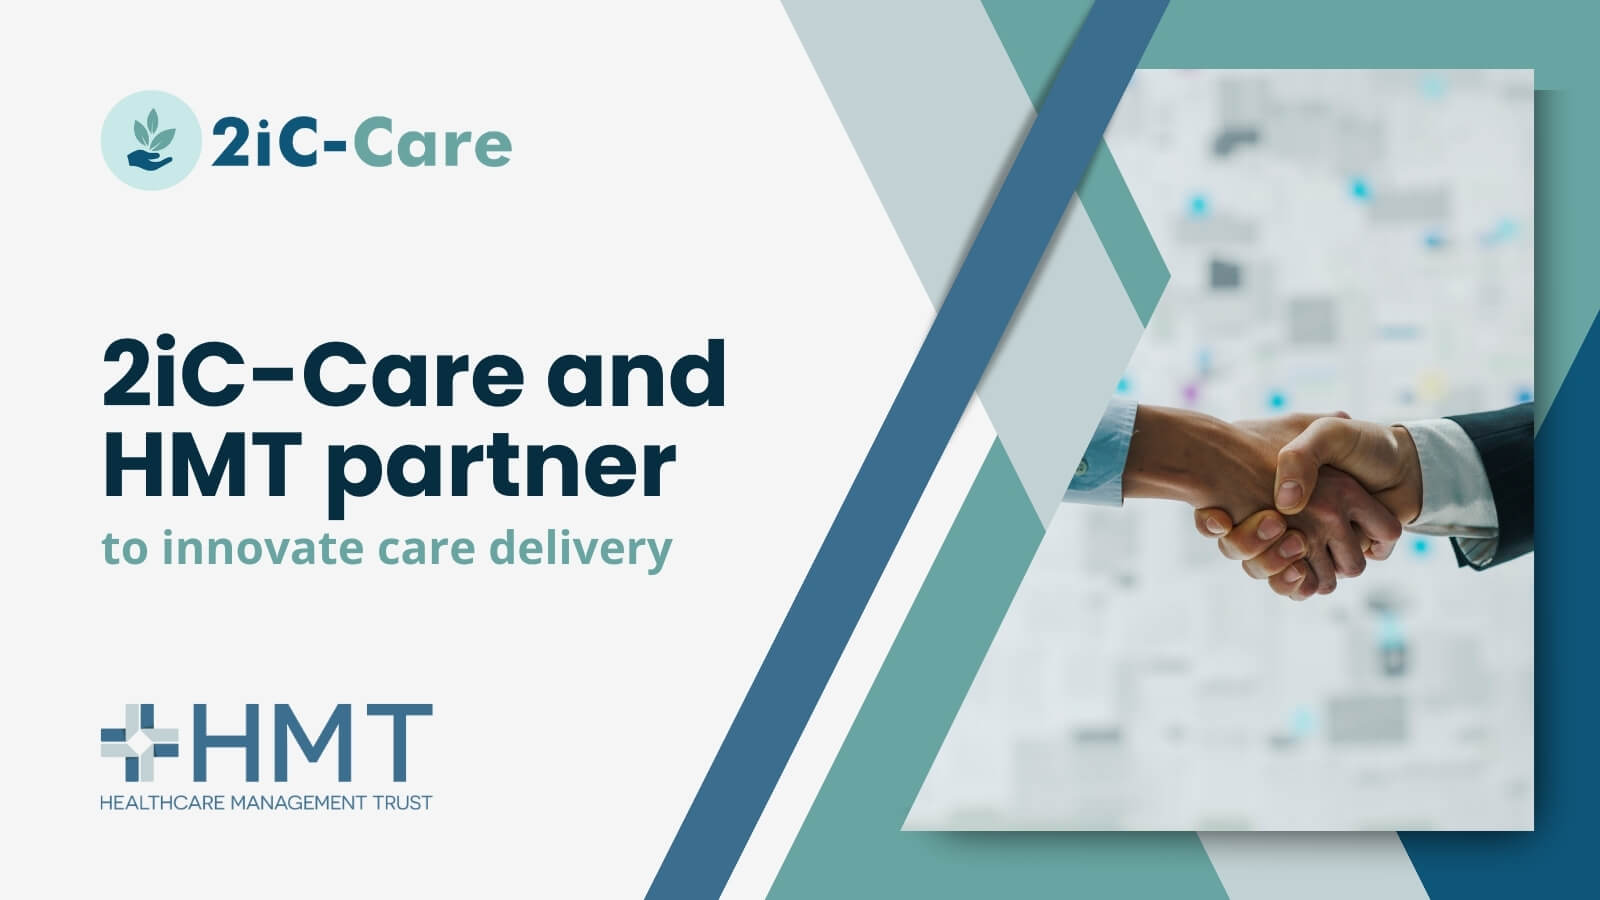 Healthcare Management Trust Partners with 2iC-Care to use innovative technology to improve care for residents in Bromley Care home.